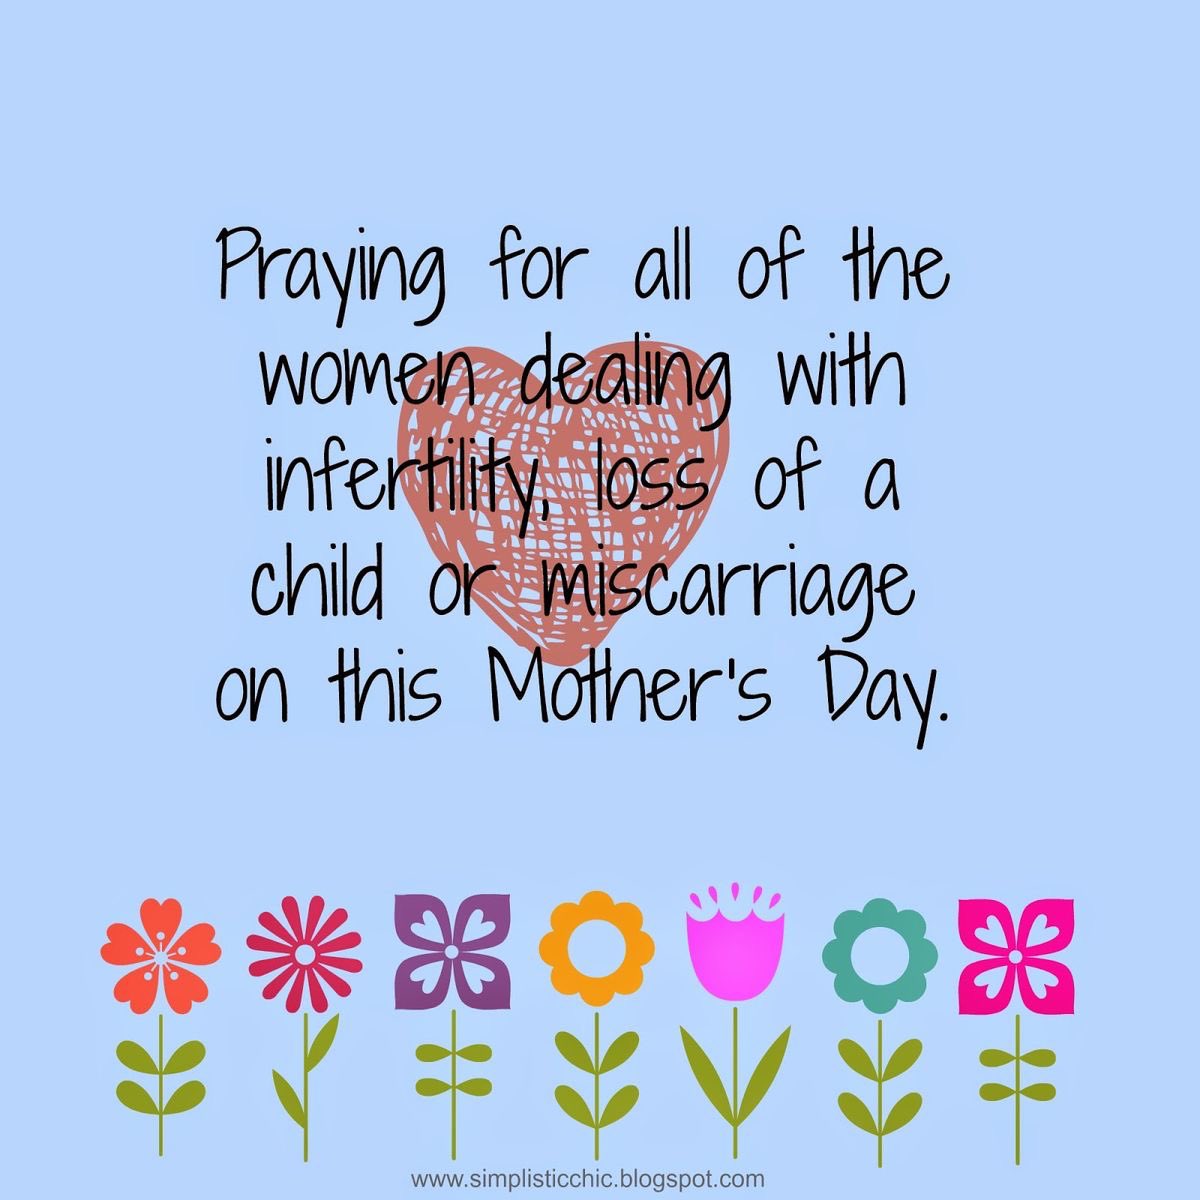 A special Mother’s Day shout out to all the women yearning to be moms and grieving because of infertility. This day is still emotional for me even when I am on the other side. I still grieve with my sisters who are struggling…that journey is not an easy one.